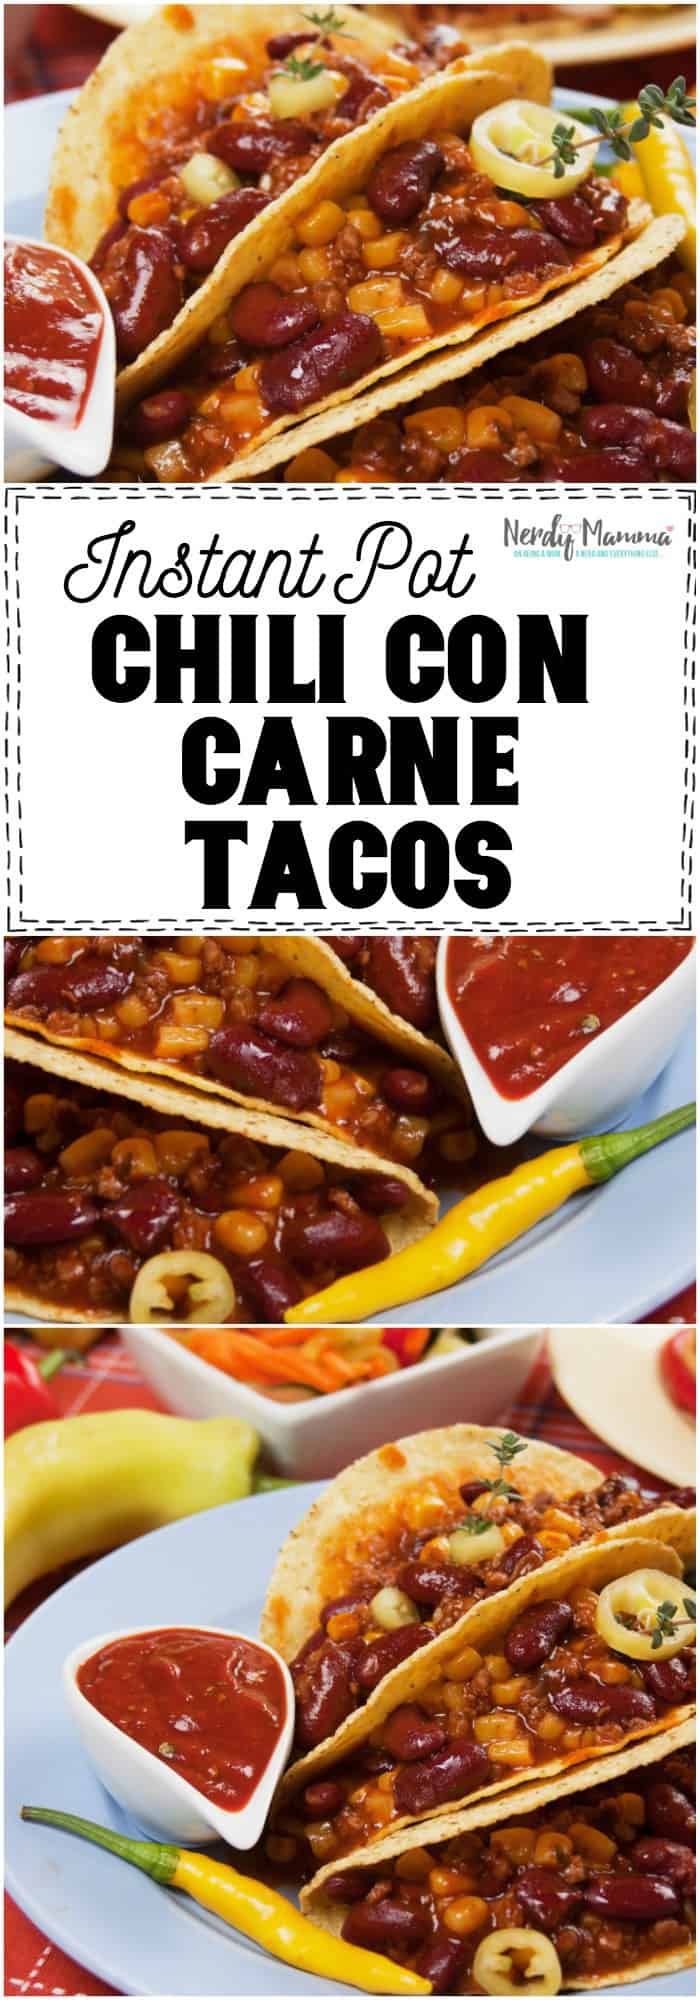 Wow. I never thought to make Instant Pot Chili Con Carne Tacos. So simple, yet so awesome! #recipe #taco #texmex #mexican #chiliconcarne #chili #yum